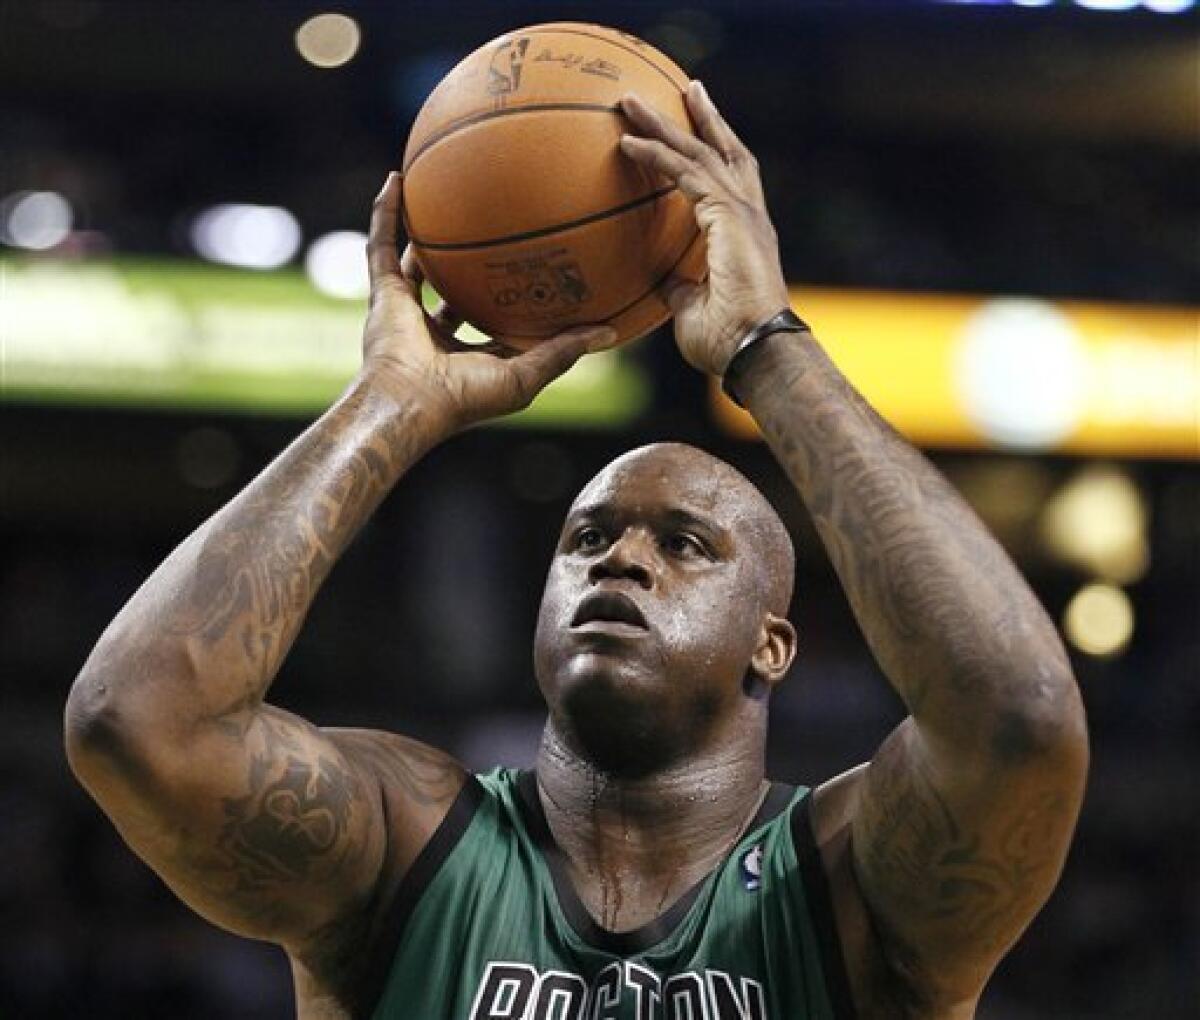 FILE- In this Nov. 26, 2010 file phtoo, Boston Celtics' Shaquille O'Neal wears a Power Balance bracelet on his left wrist during a NBA basketball game against the Toronto Raptors in Boston. Australian authorities on Tuesday, Jan. 4, 2010 said the California-based company behind the wildly popular Power Balance wristbands and pendants has no business claiming that they can improve balance, strength and flexibility. And they even got Power Balance to admit it. (AP Photo/Winslow Townson, File)